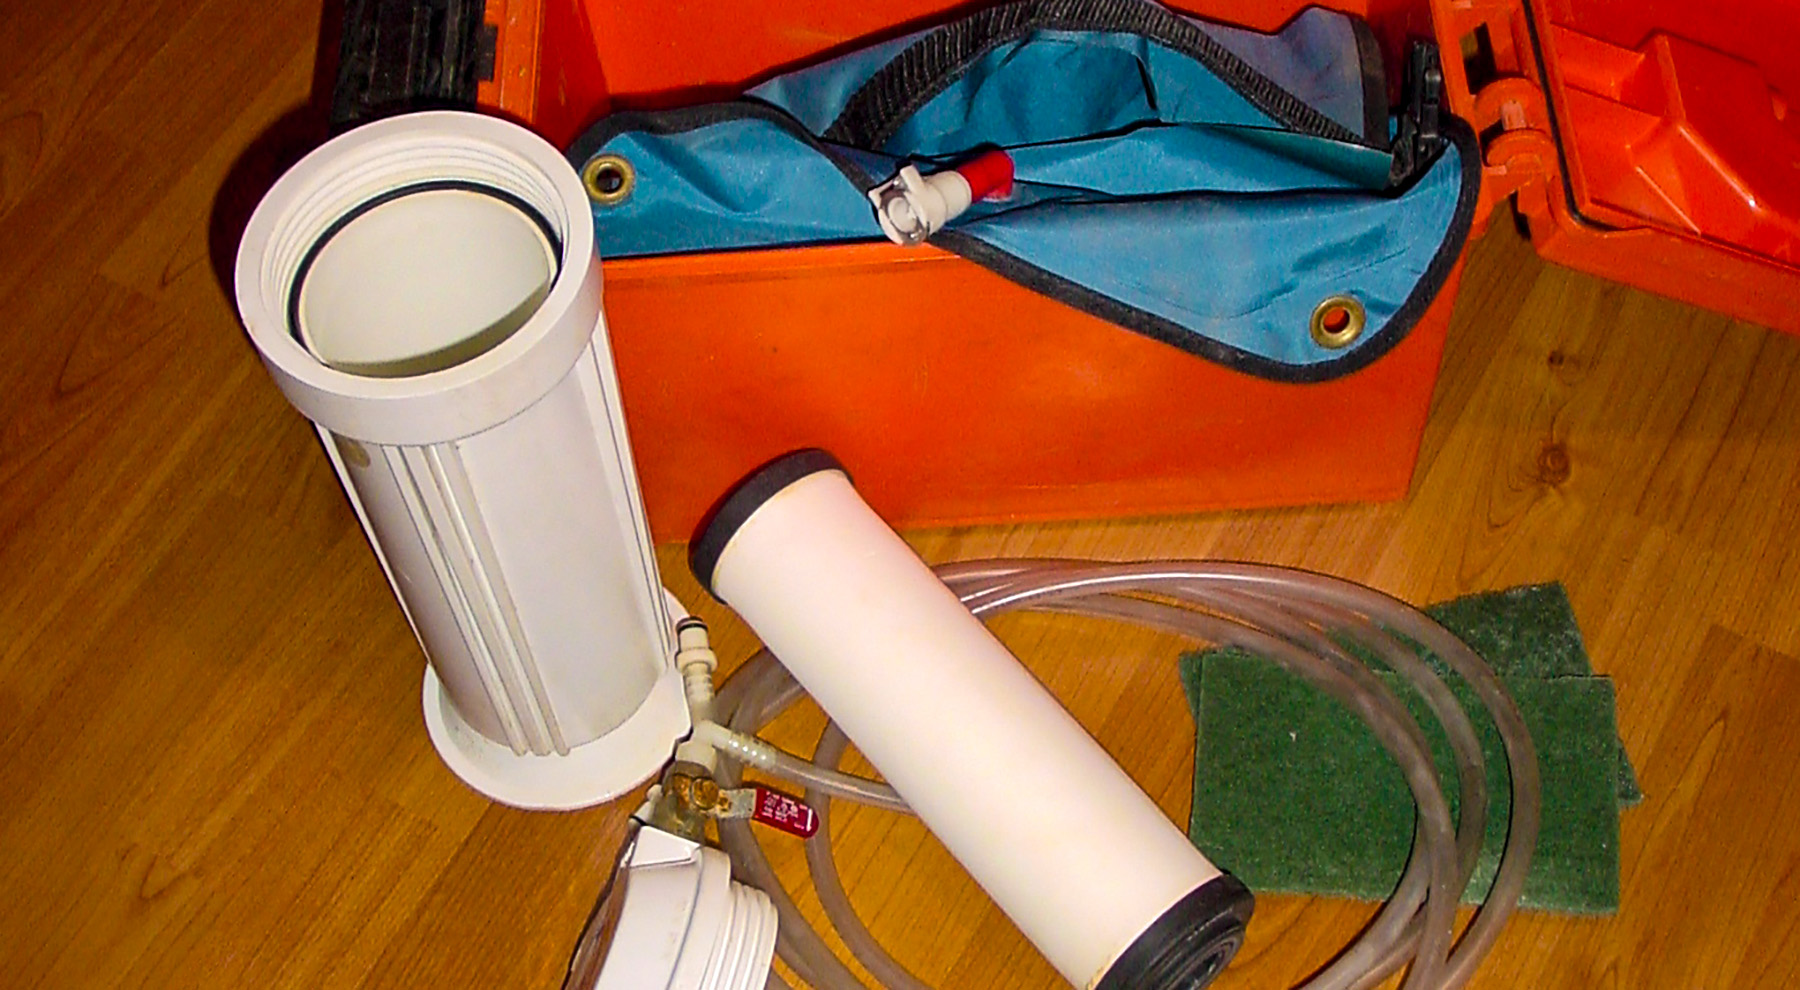 RAFT bulk water filtration system for remote expeditions